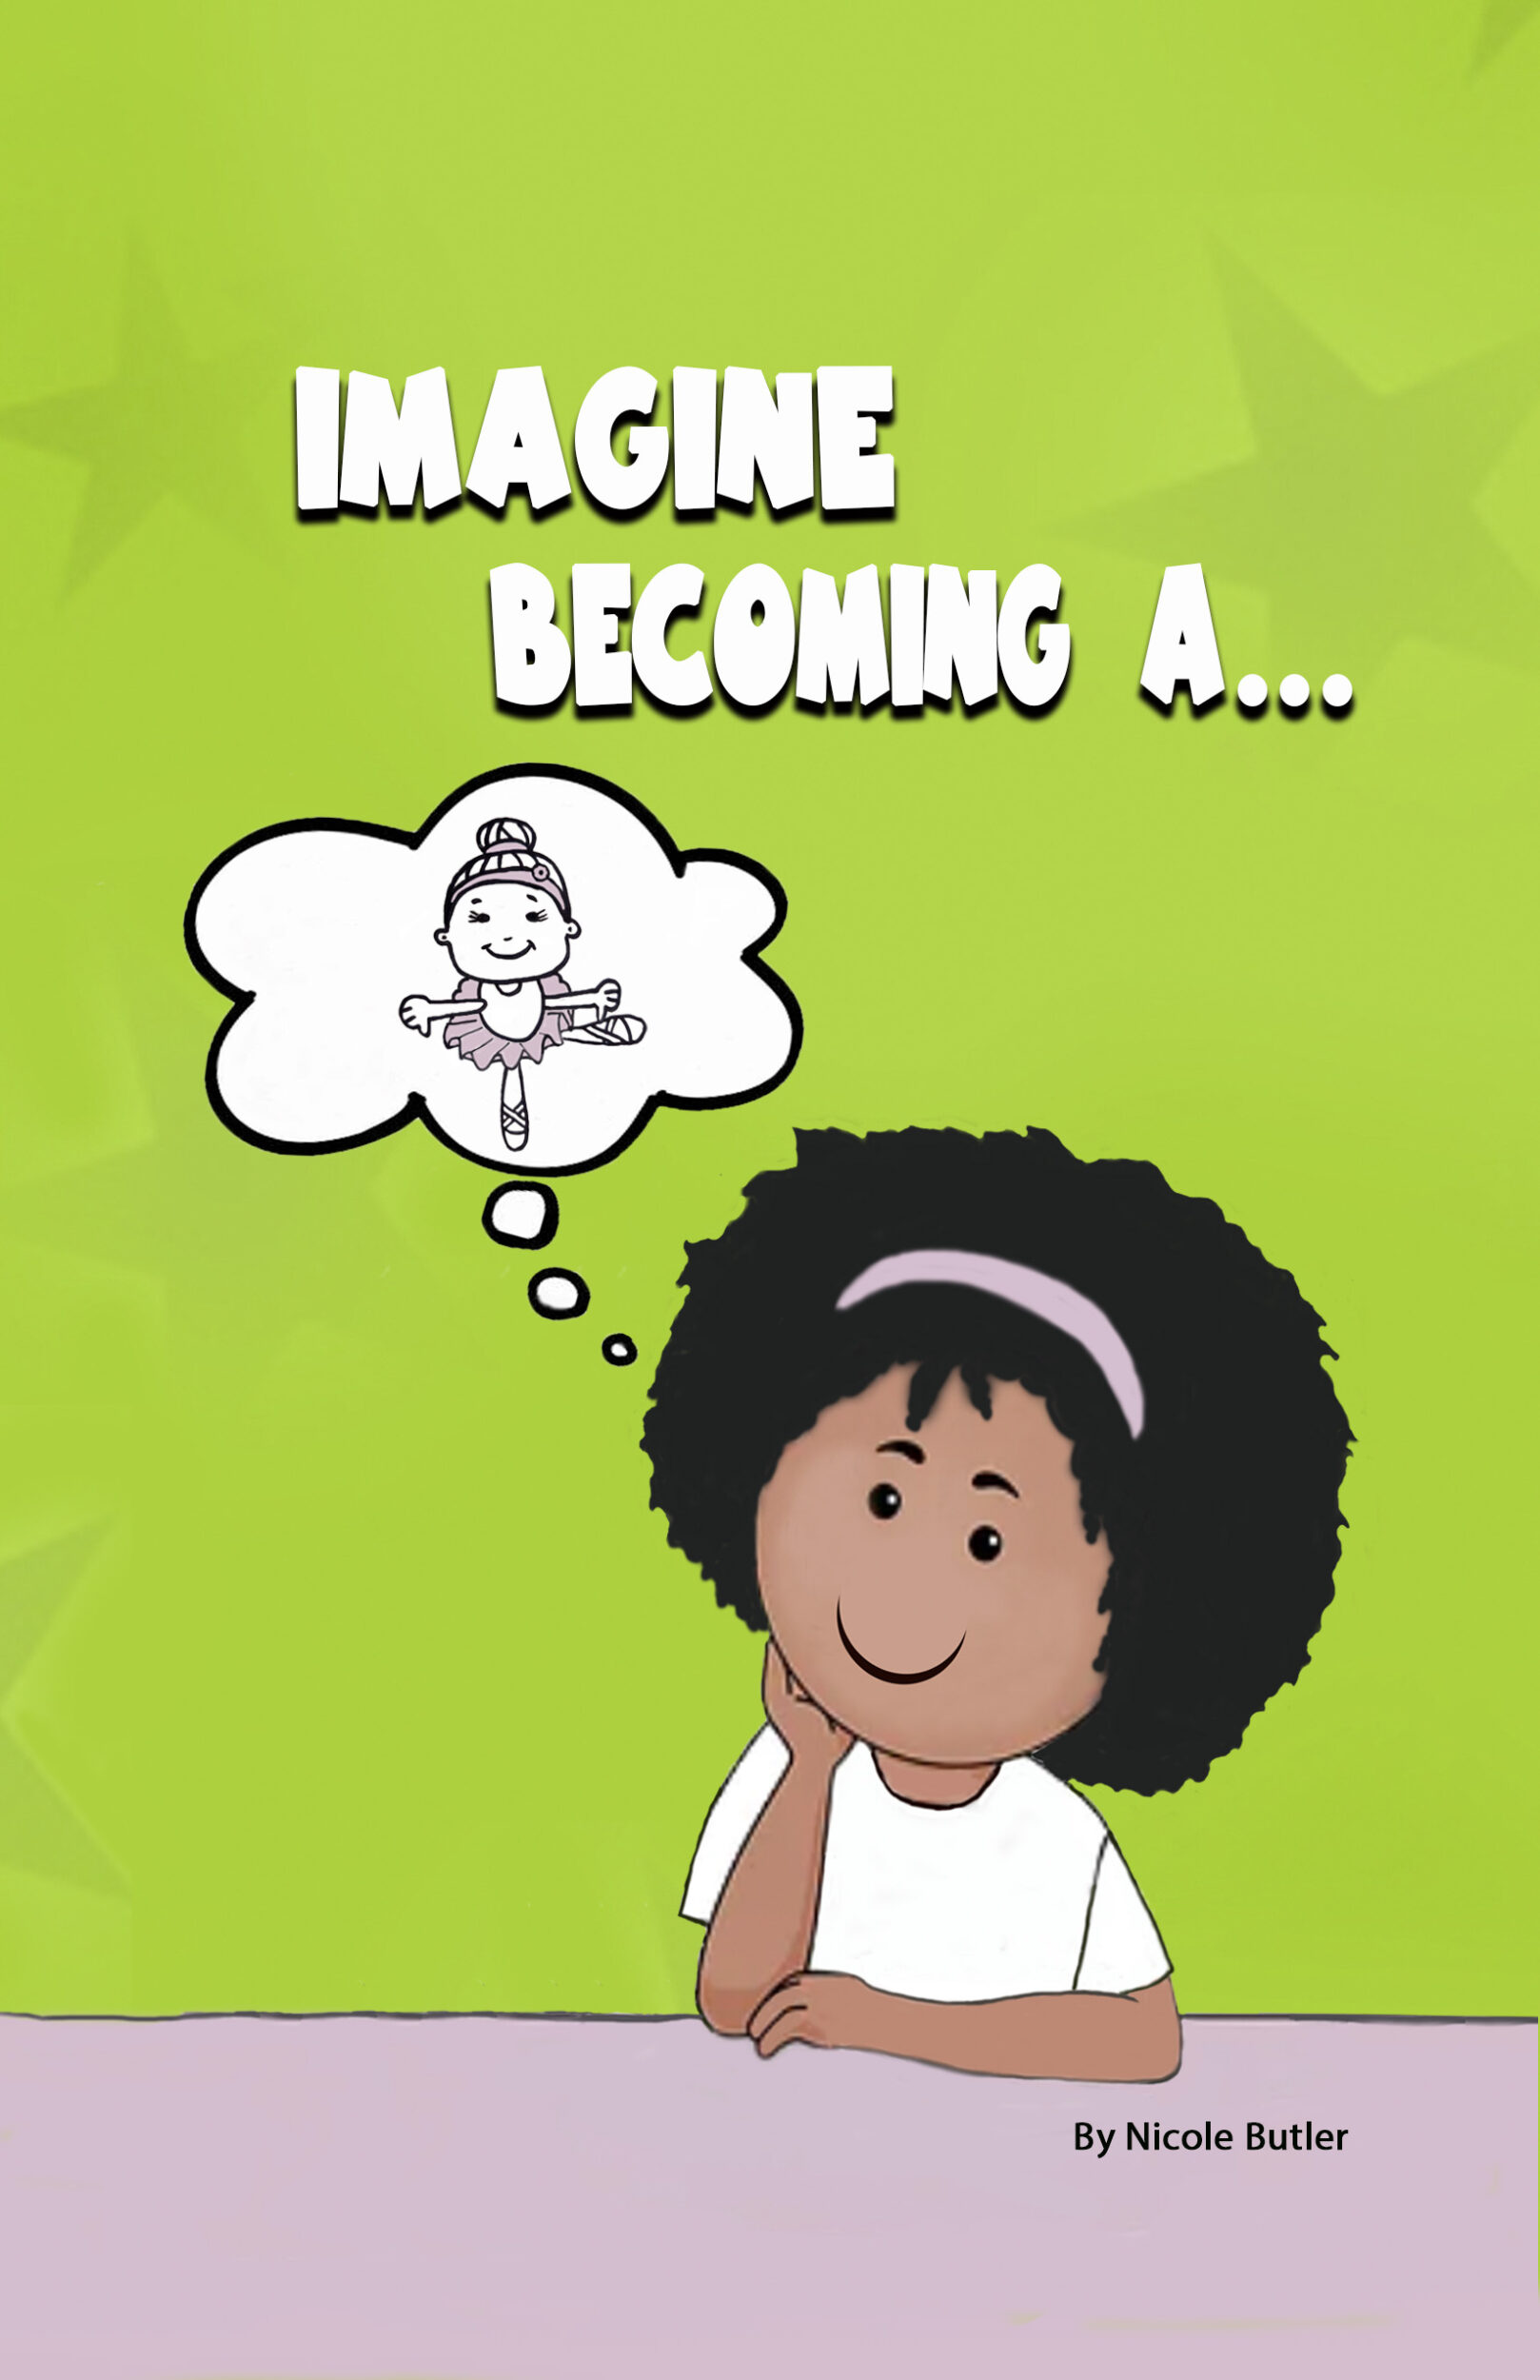 Cover of children's book 'Imagine Becoming a...'.